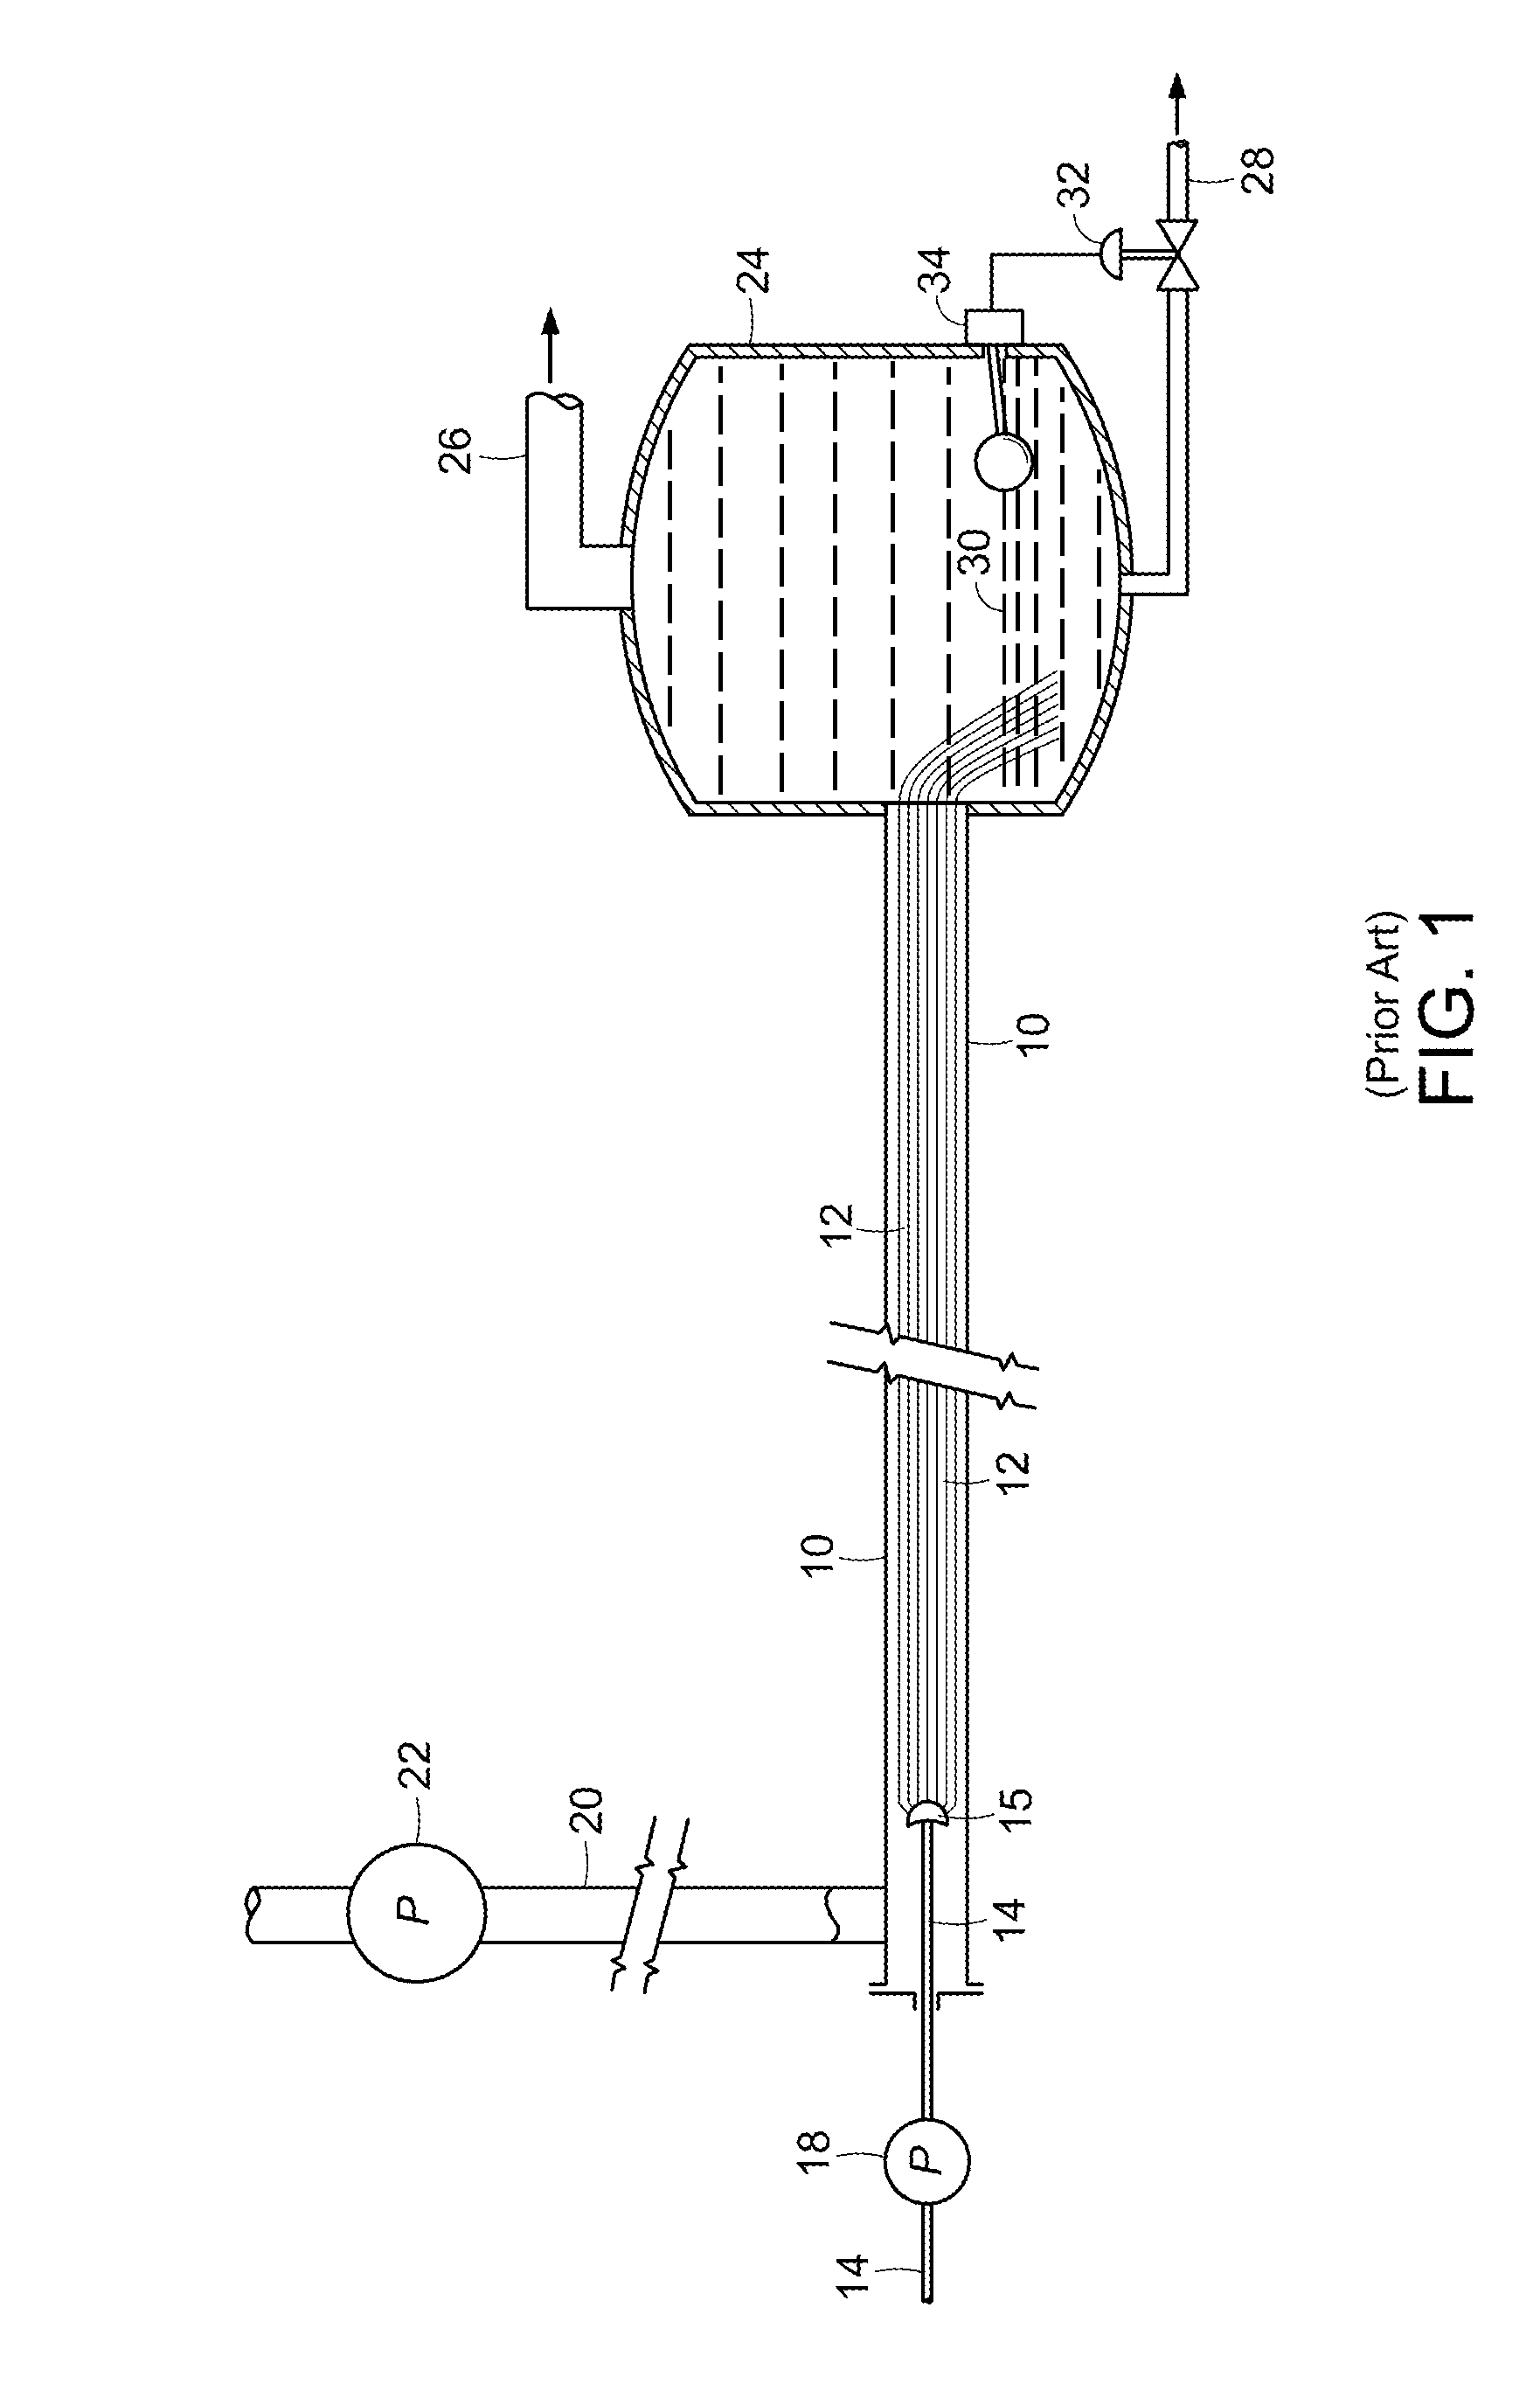 Method and System for Production of a Chemical Commodity Using a Fiber Conduit Reactor